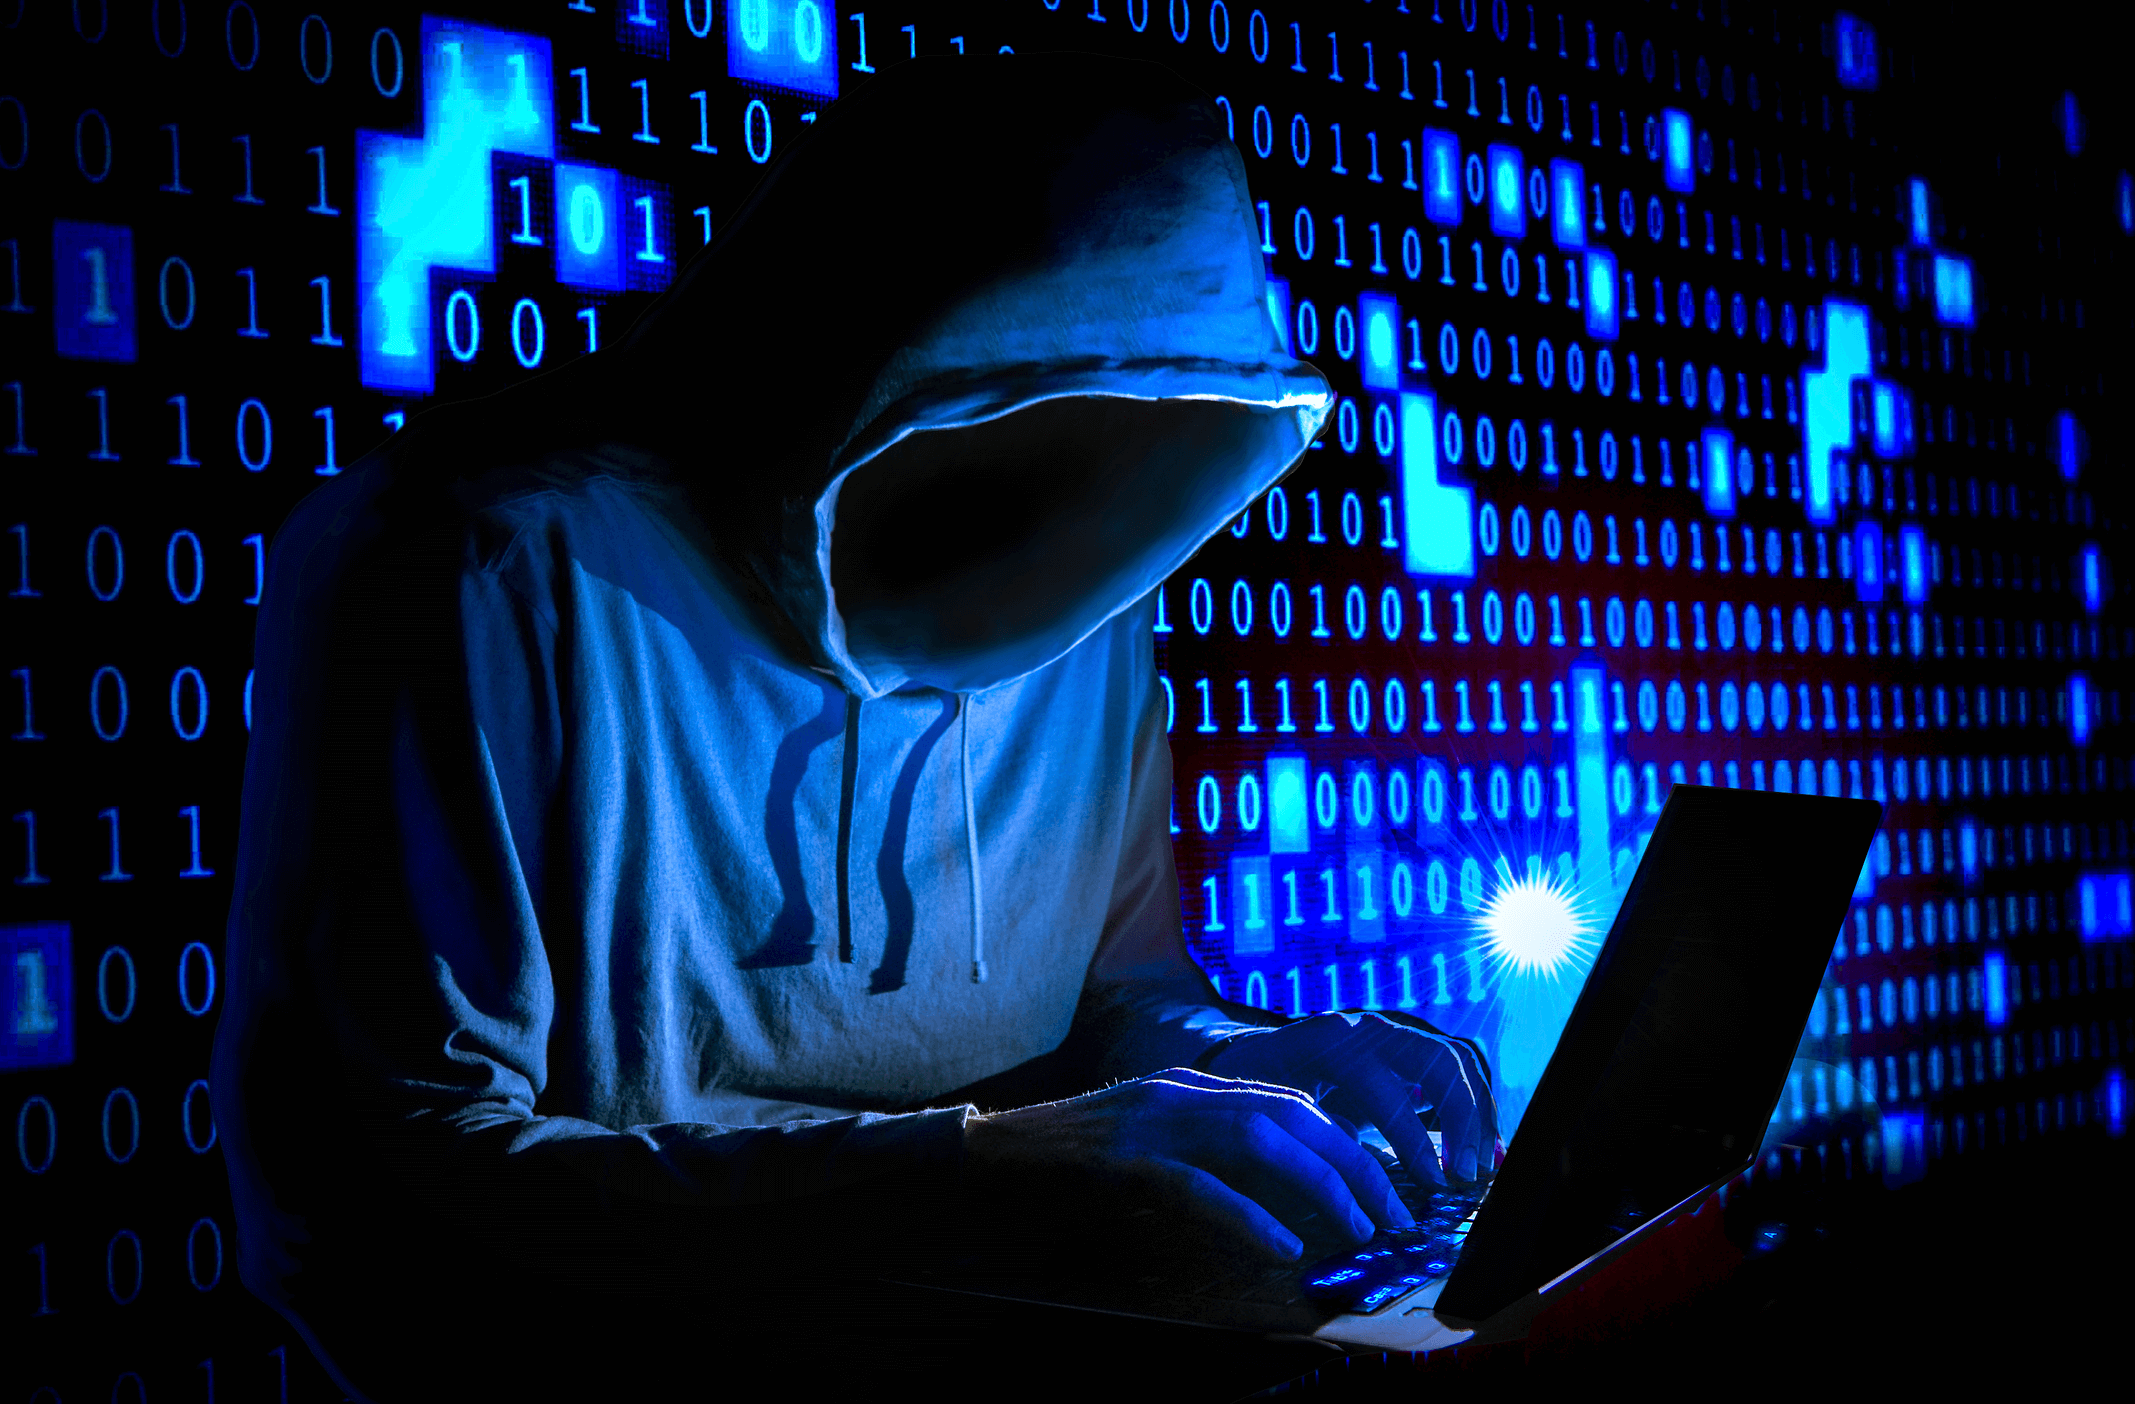 A Notorious Iranian Hacking Crew Is Targeting Industrial Control